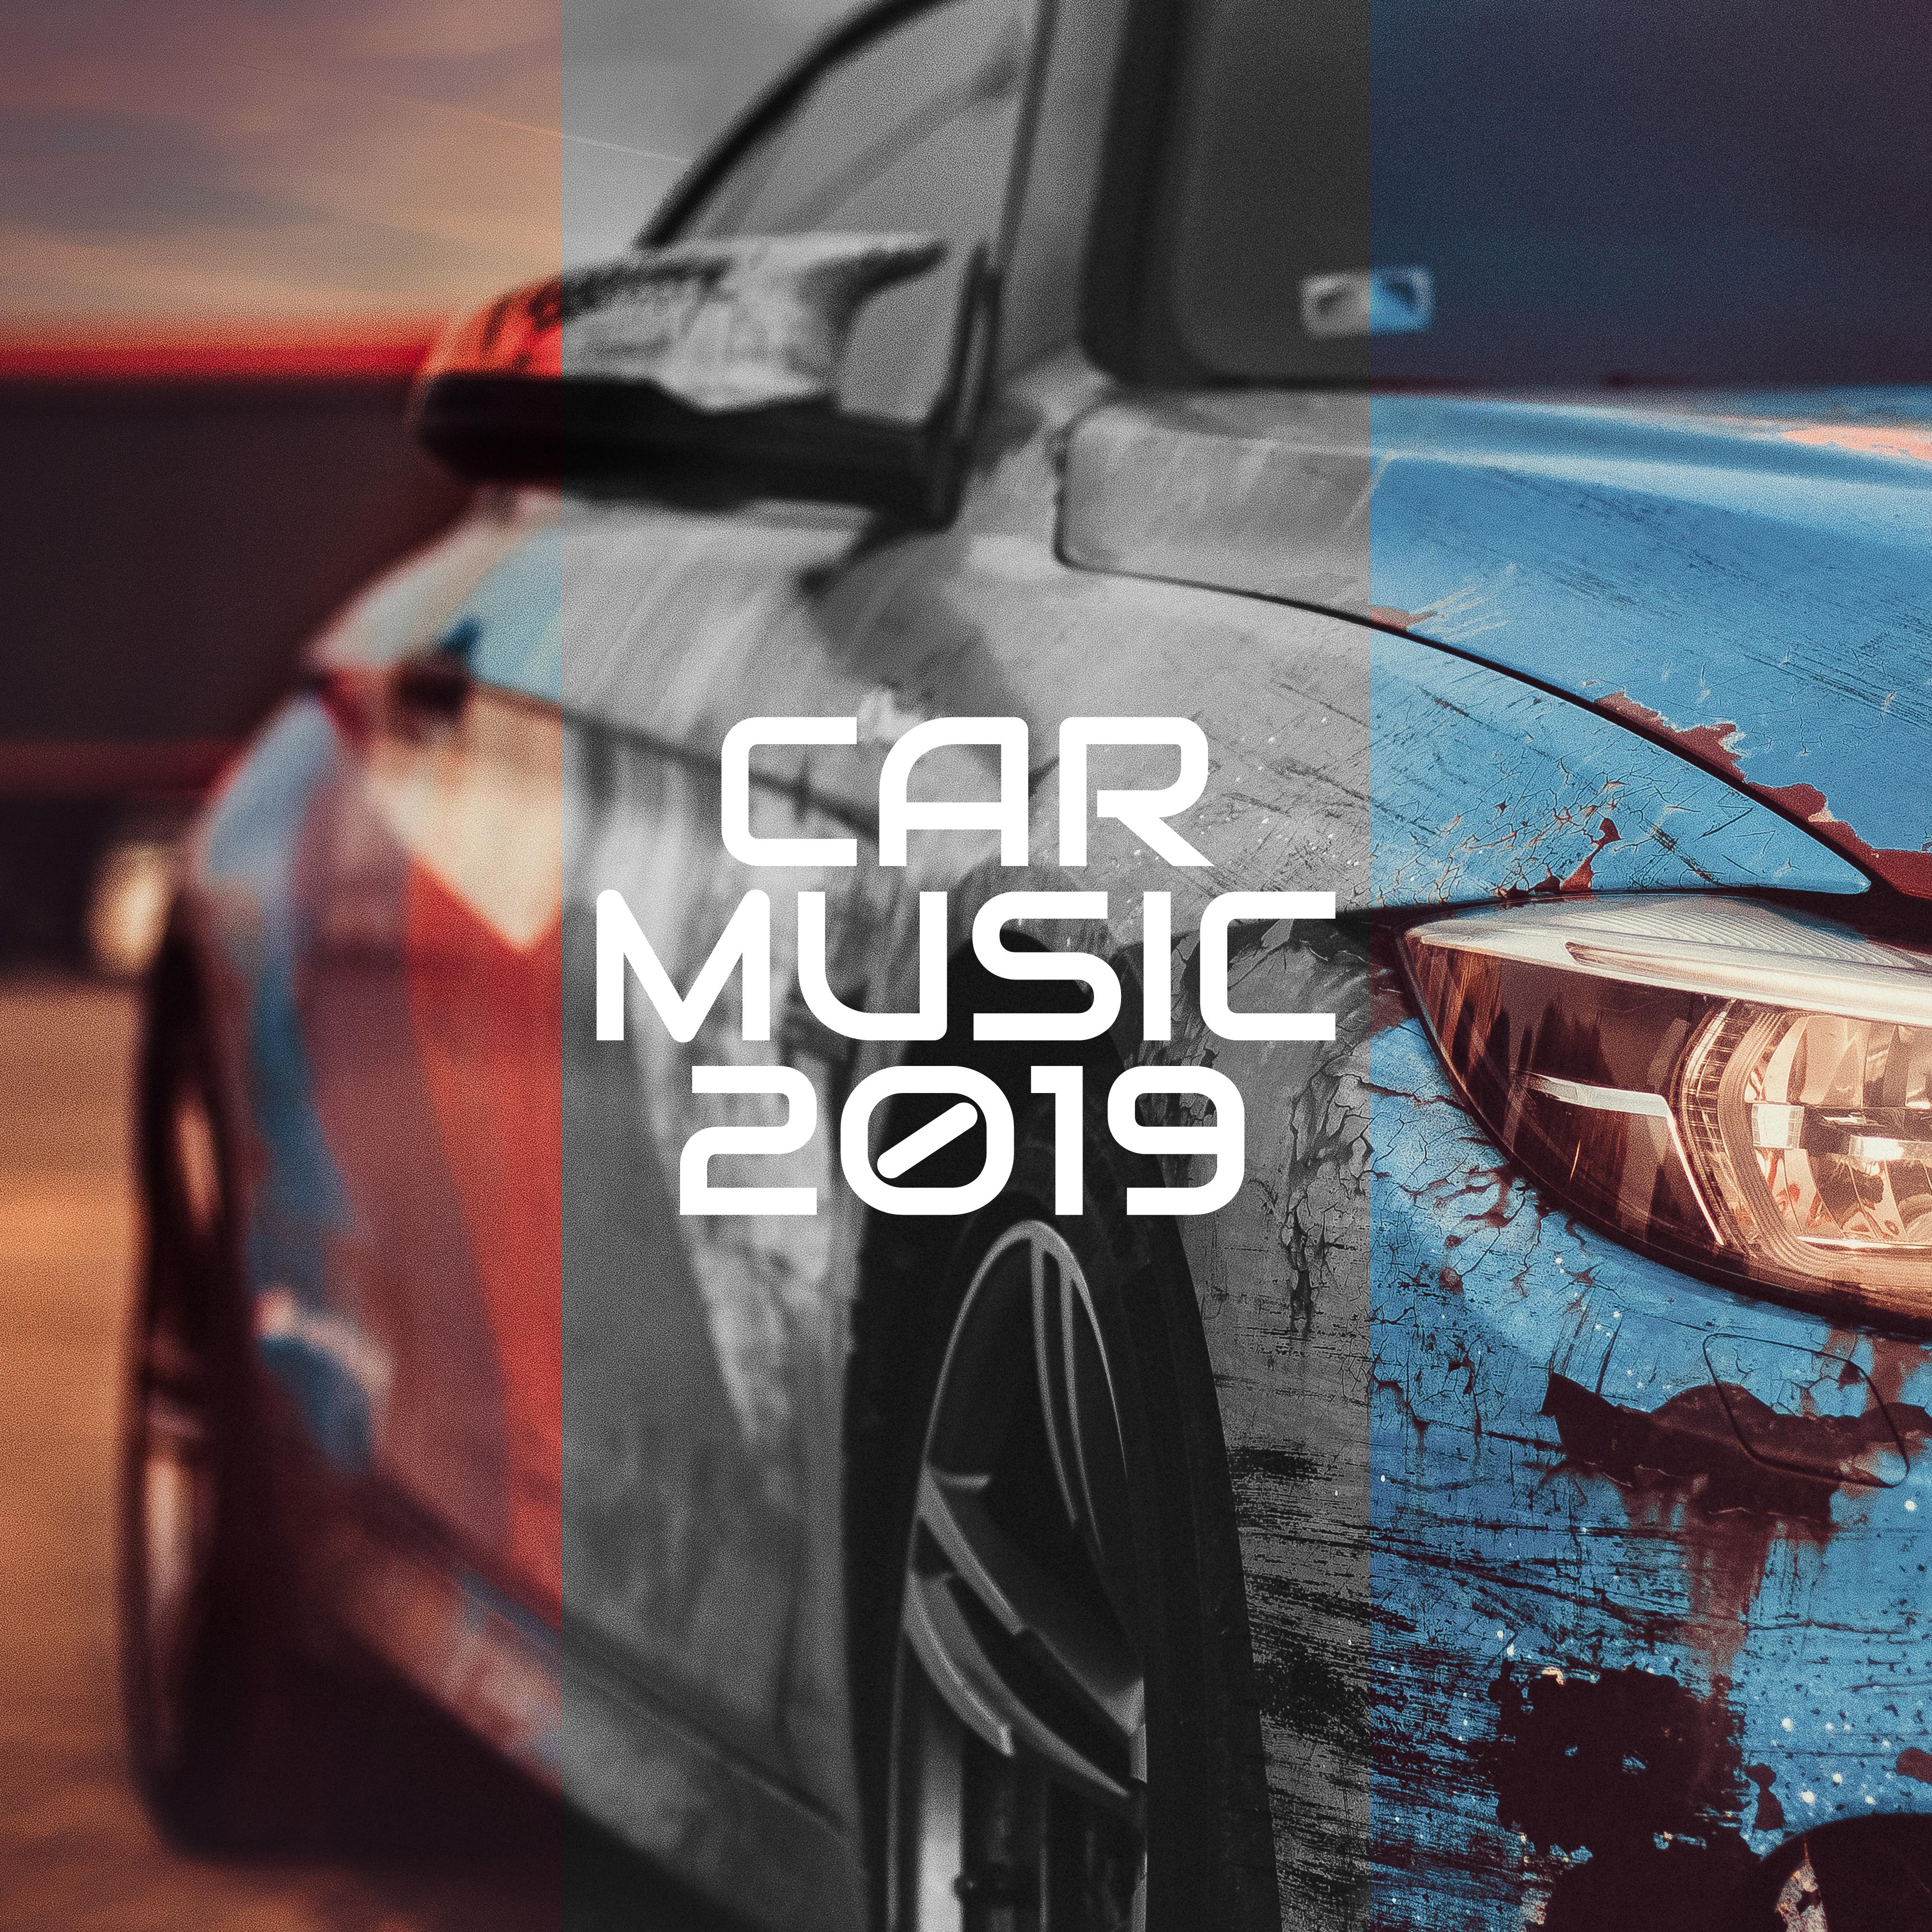 Car Music 2019 – Party Hits for Car, Relax, Chill Out 2019, 15 Car Beats, Dance Music, Lounge, **** Vibes